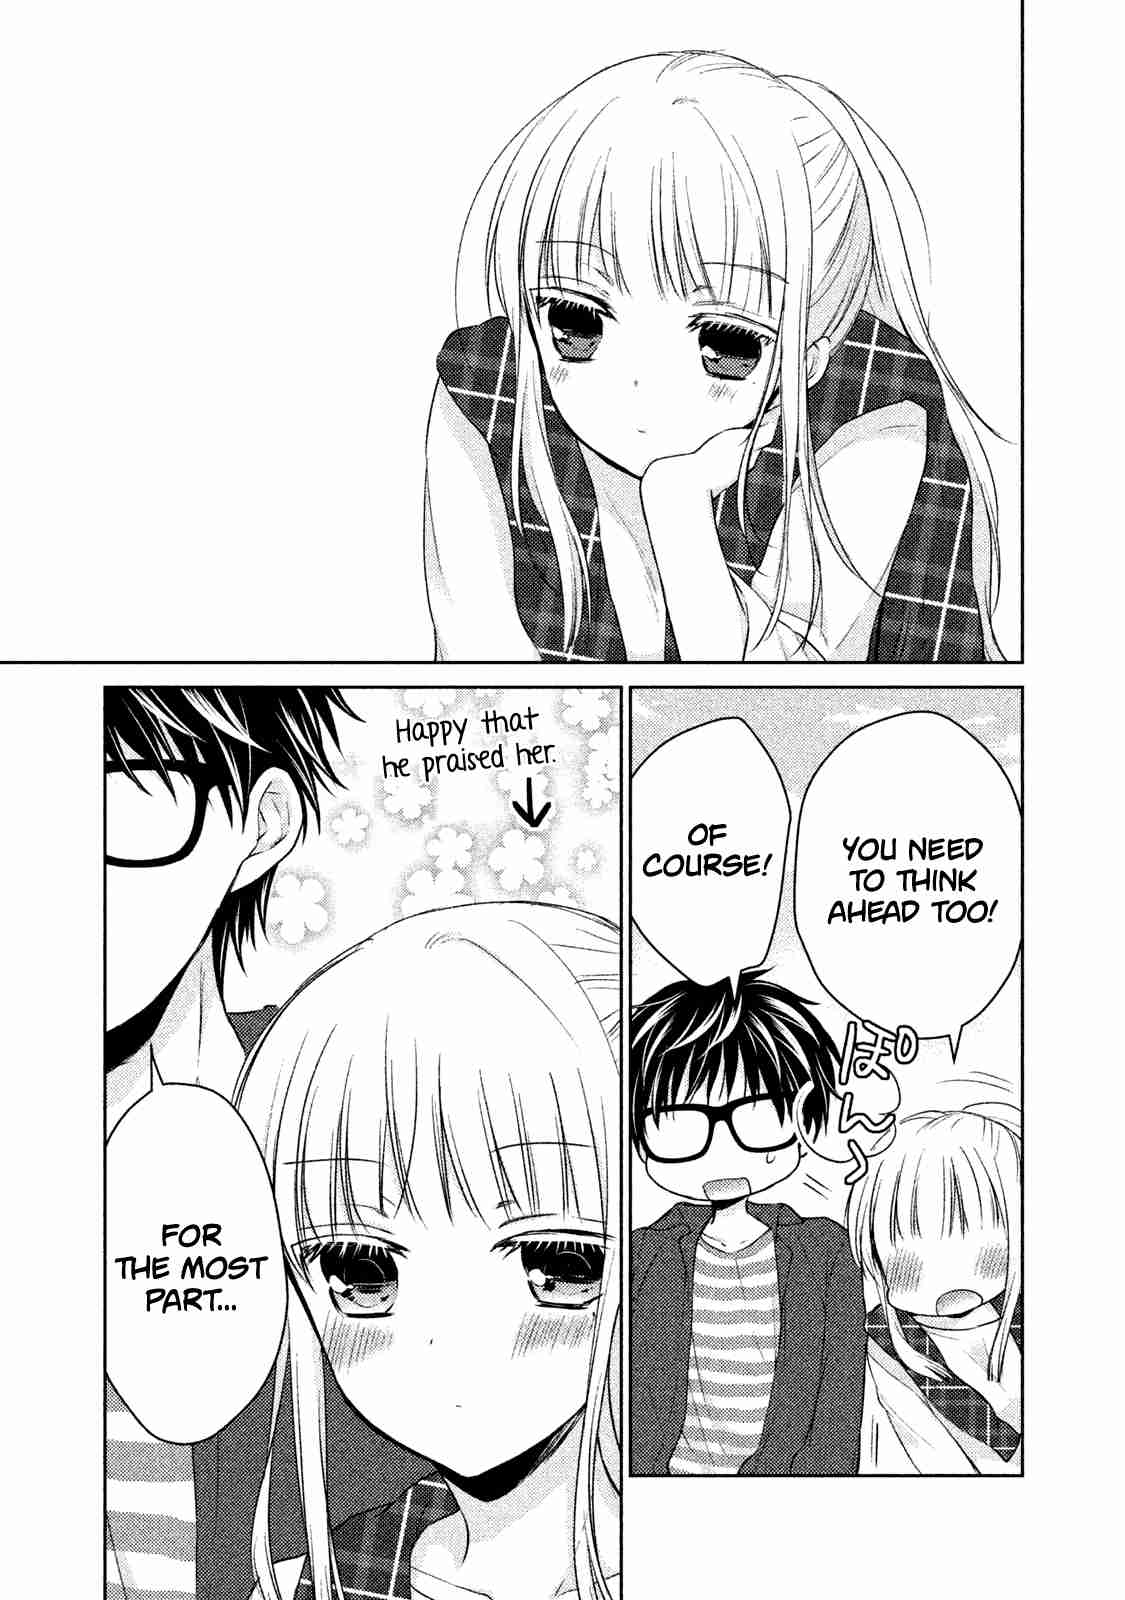 We May Be An Inexperienced Couple But... Vol. 3 Ch. 18 Early Morning Date